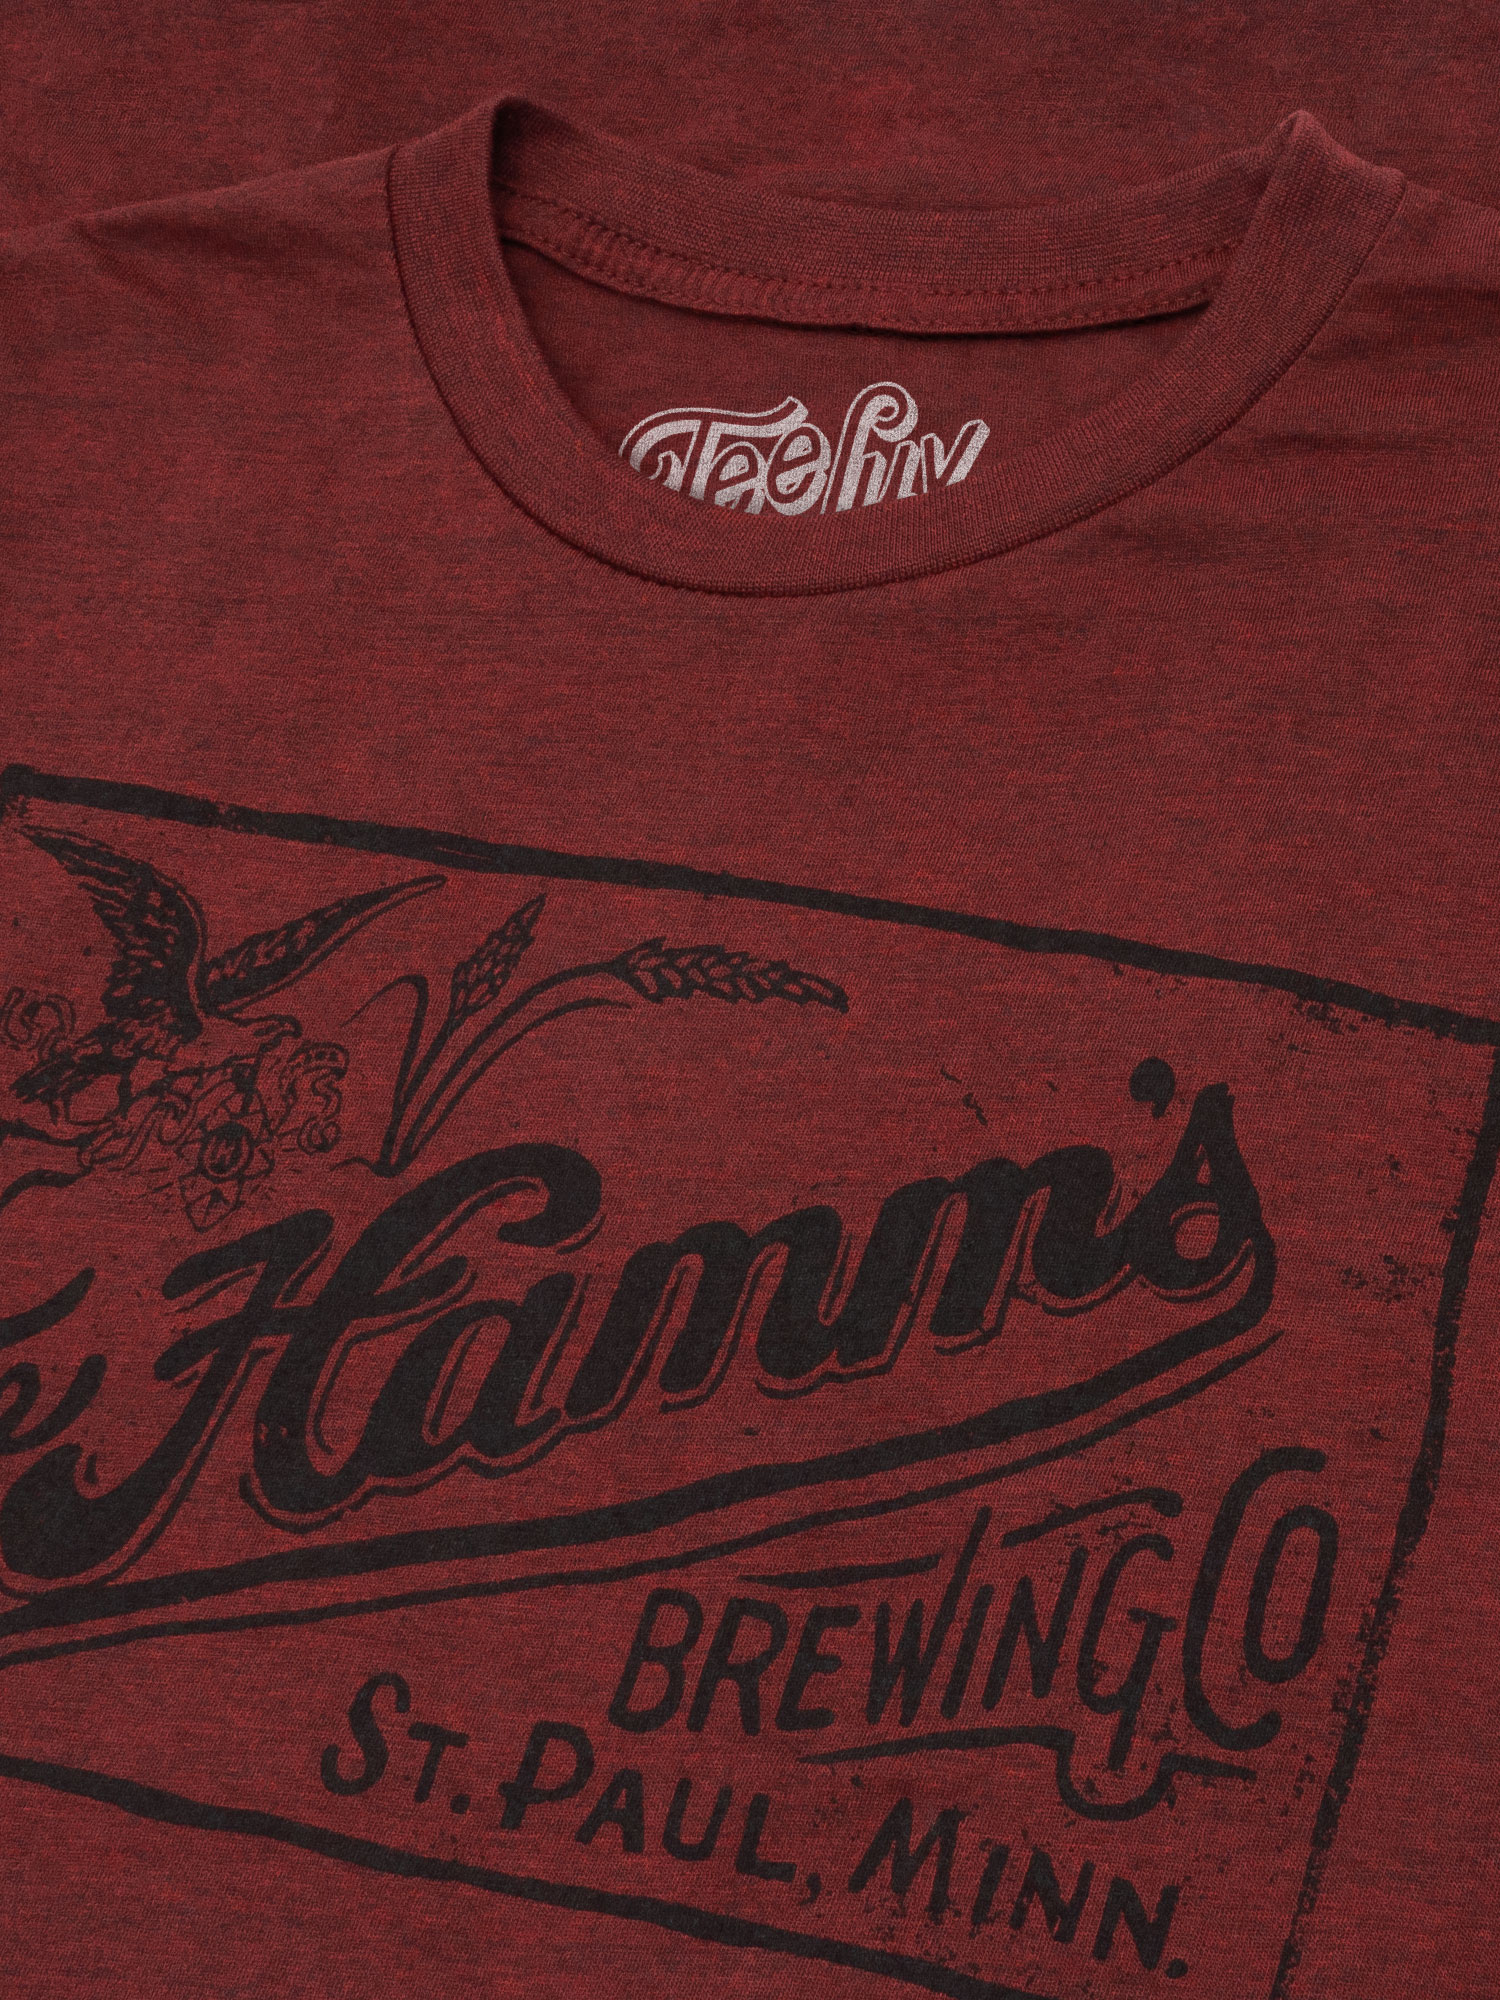 Tee Luv Men's Hamm's Brewing Company Faded Beer Logo Shirt (S) - image 2 of 7